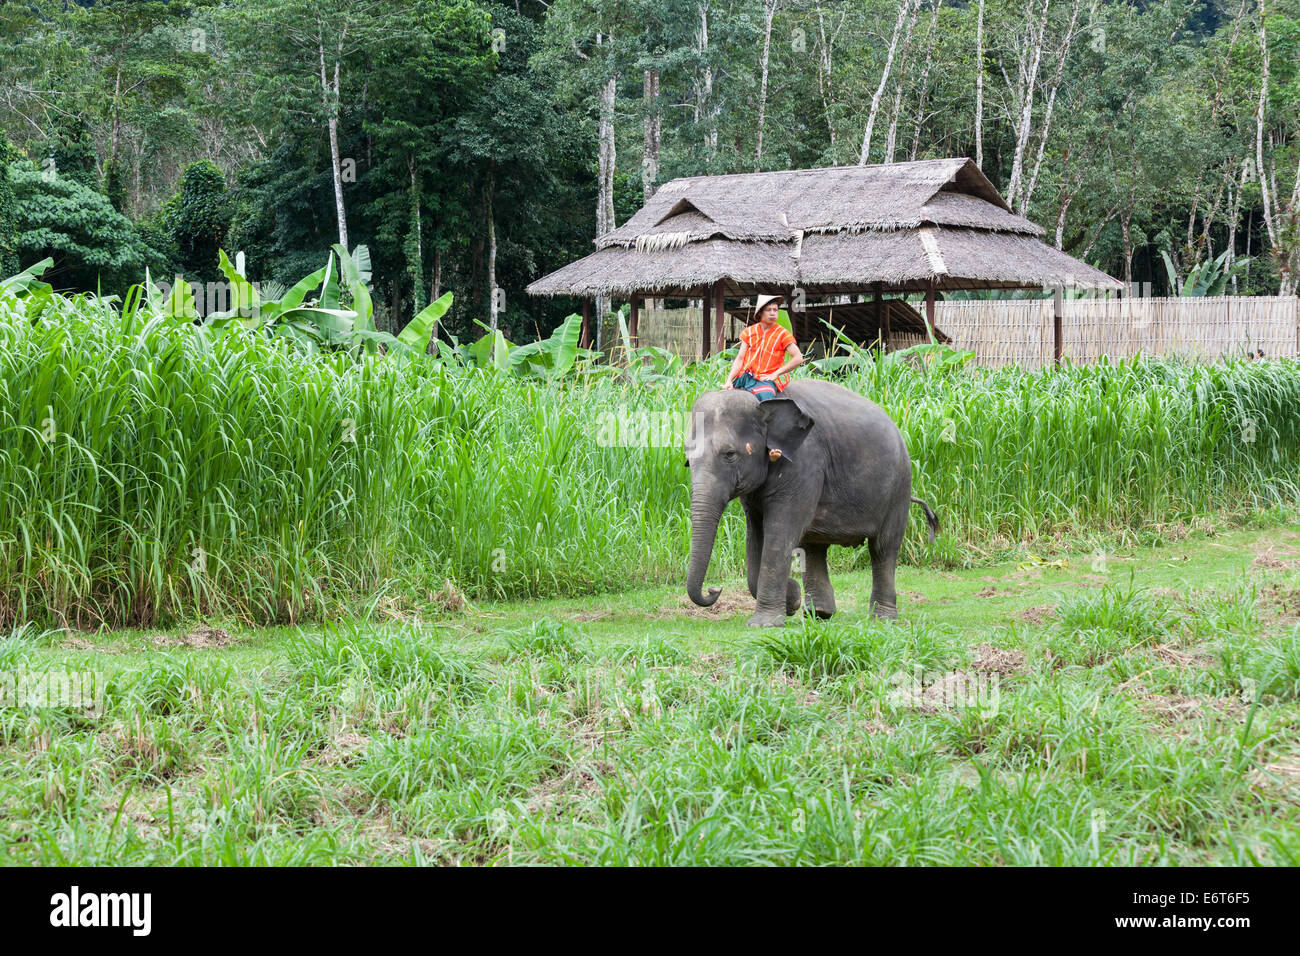 Local Thai hill tribesman wearing a conical hat and an orange shirt rides an Indian Elephant at Elephant Hills, Khao Sok National Park, Thailand Stock Photo